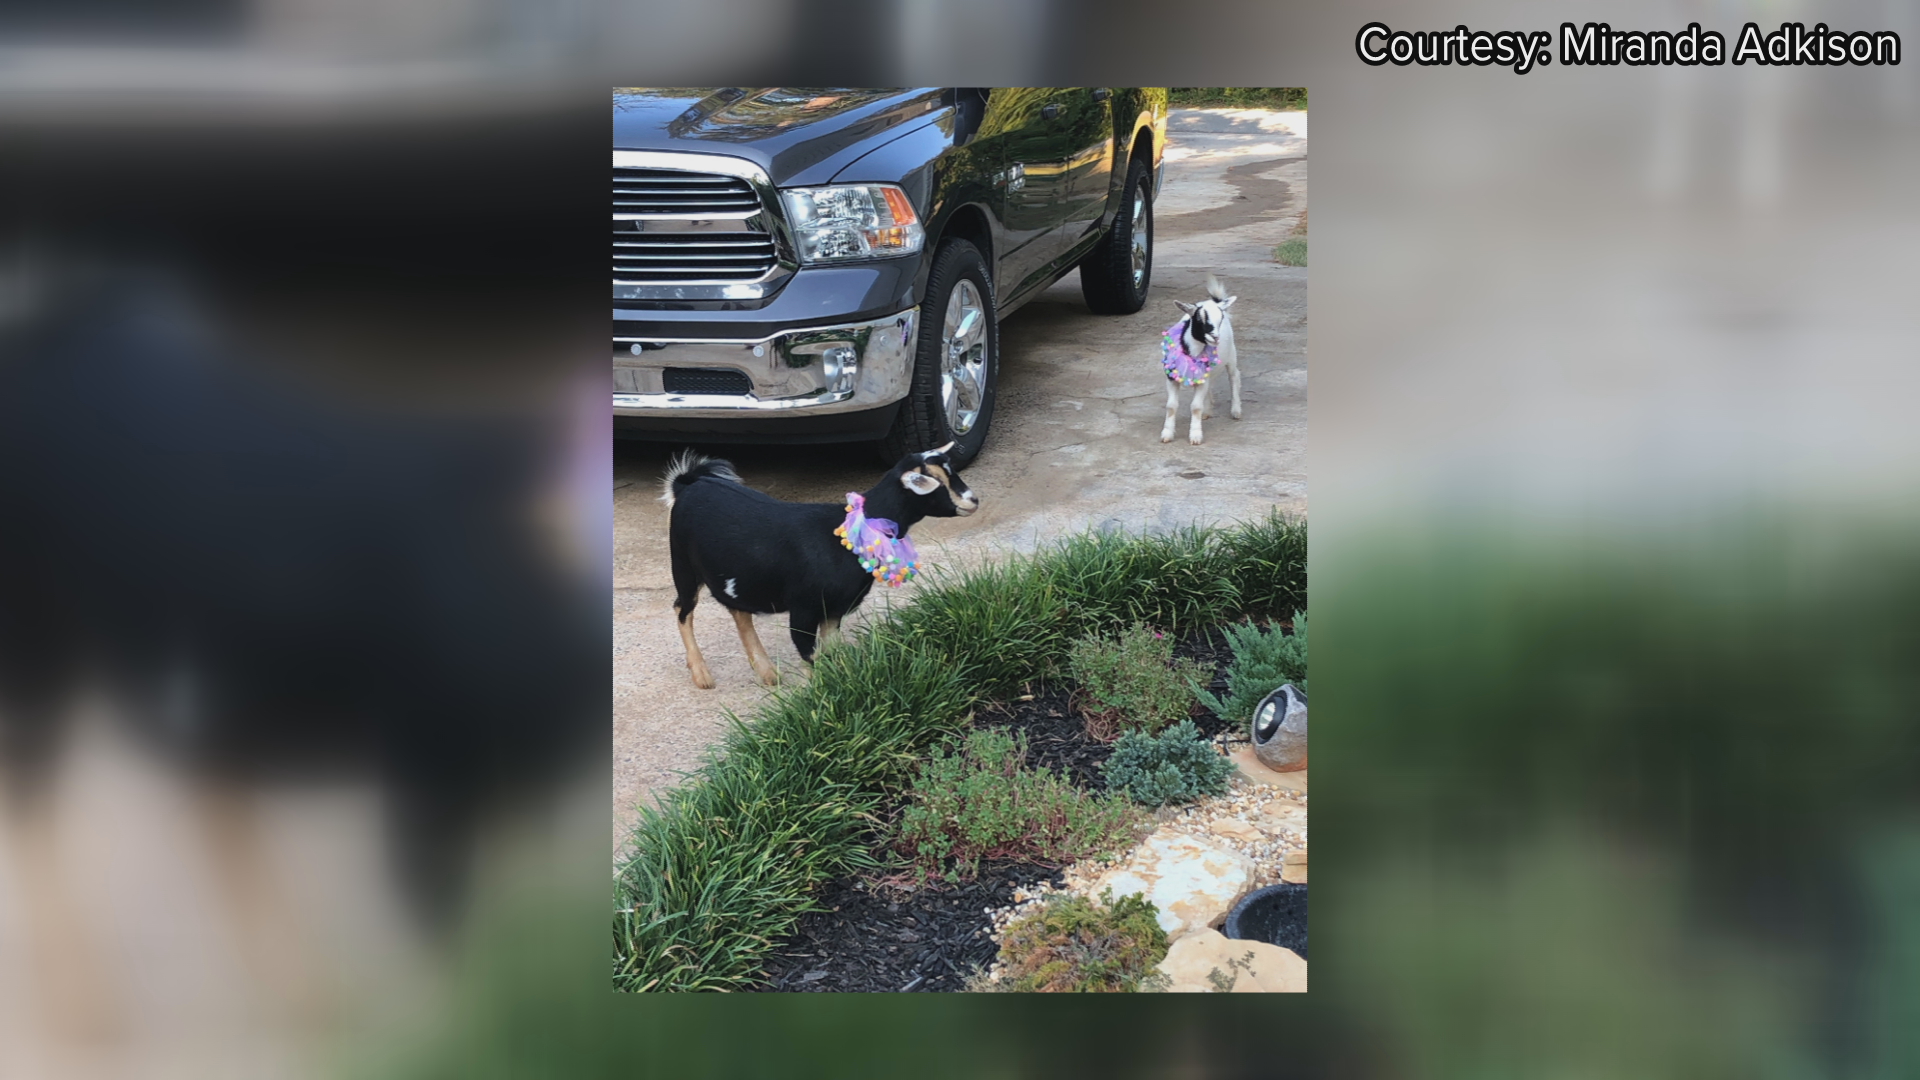 A Jones County family using two goats as emotional support animals has some neighbors concerned.